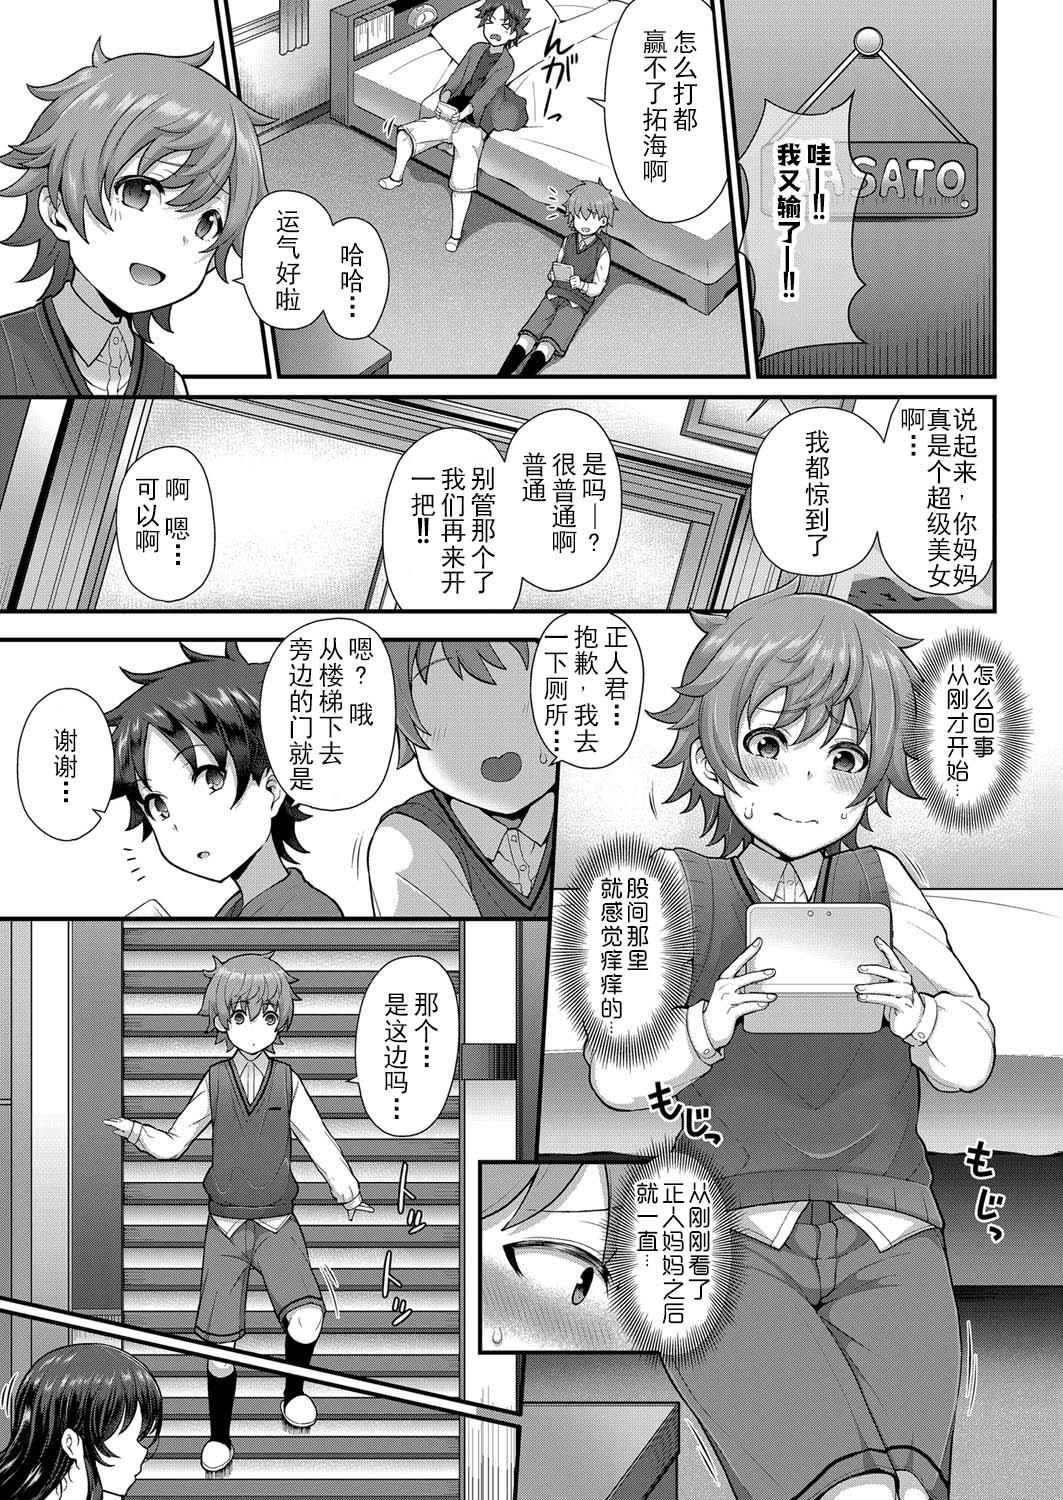 Str8 [Tawara Hiryuu] Tomo Haha to Asobo! ~Amakute Ecchi na Fudeoroshi~ | Playing With Your Friend's Mother! ~A Sweet and Naught Deflowering~ (COMIC Grape Vol. 68) [chinese] [钢华团汉化组] Teenfuns - Page 5